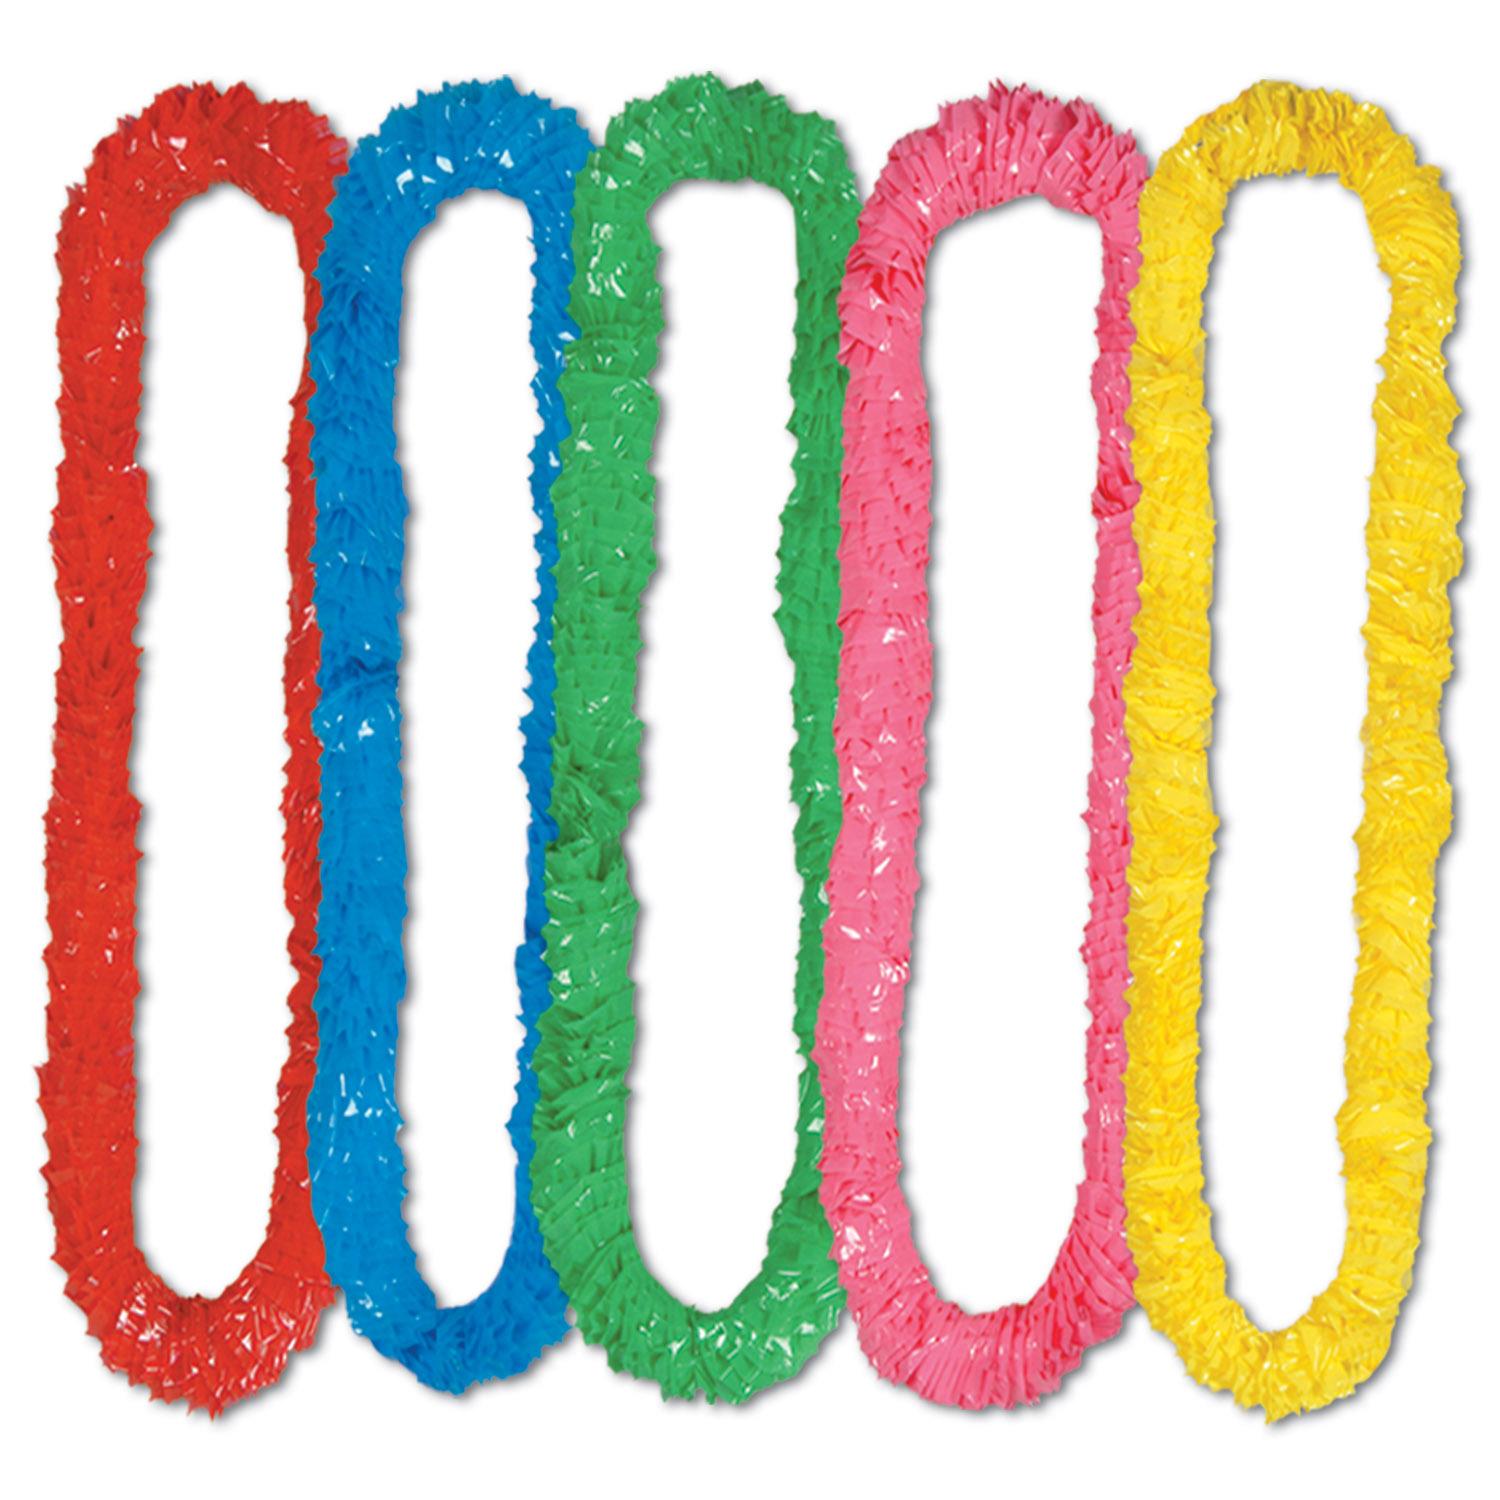 Beistle Luau Party Soft-Twist Poly Leis, assorted colors